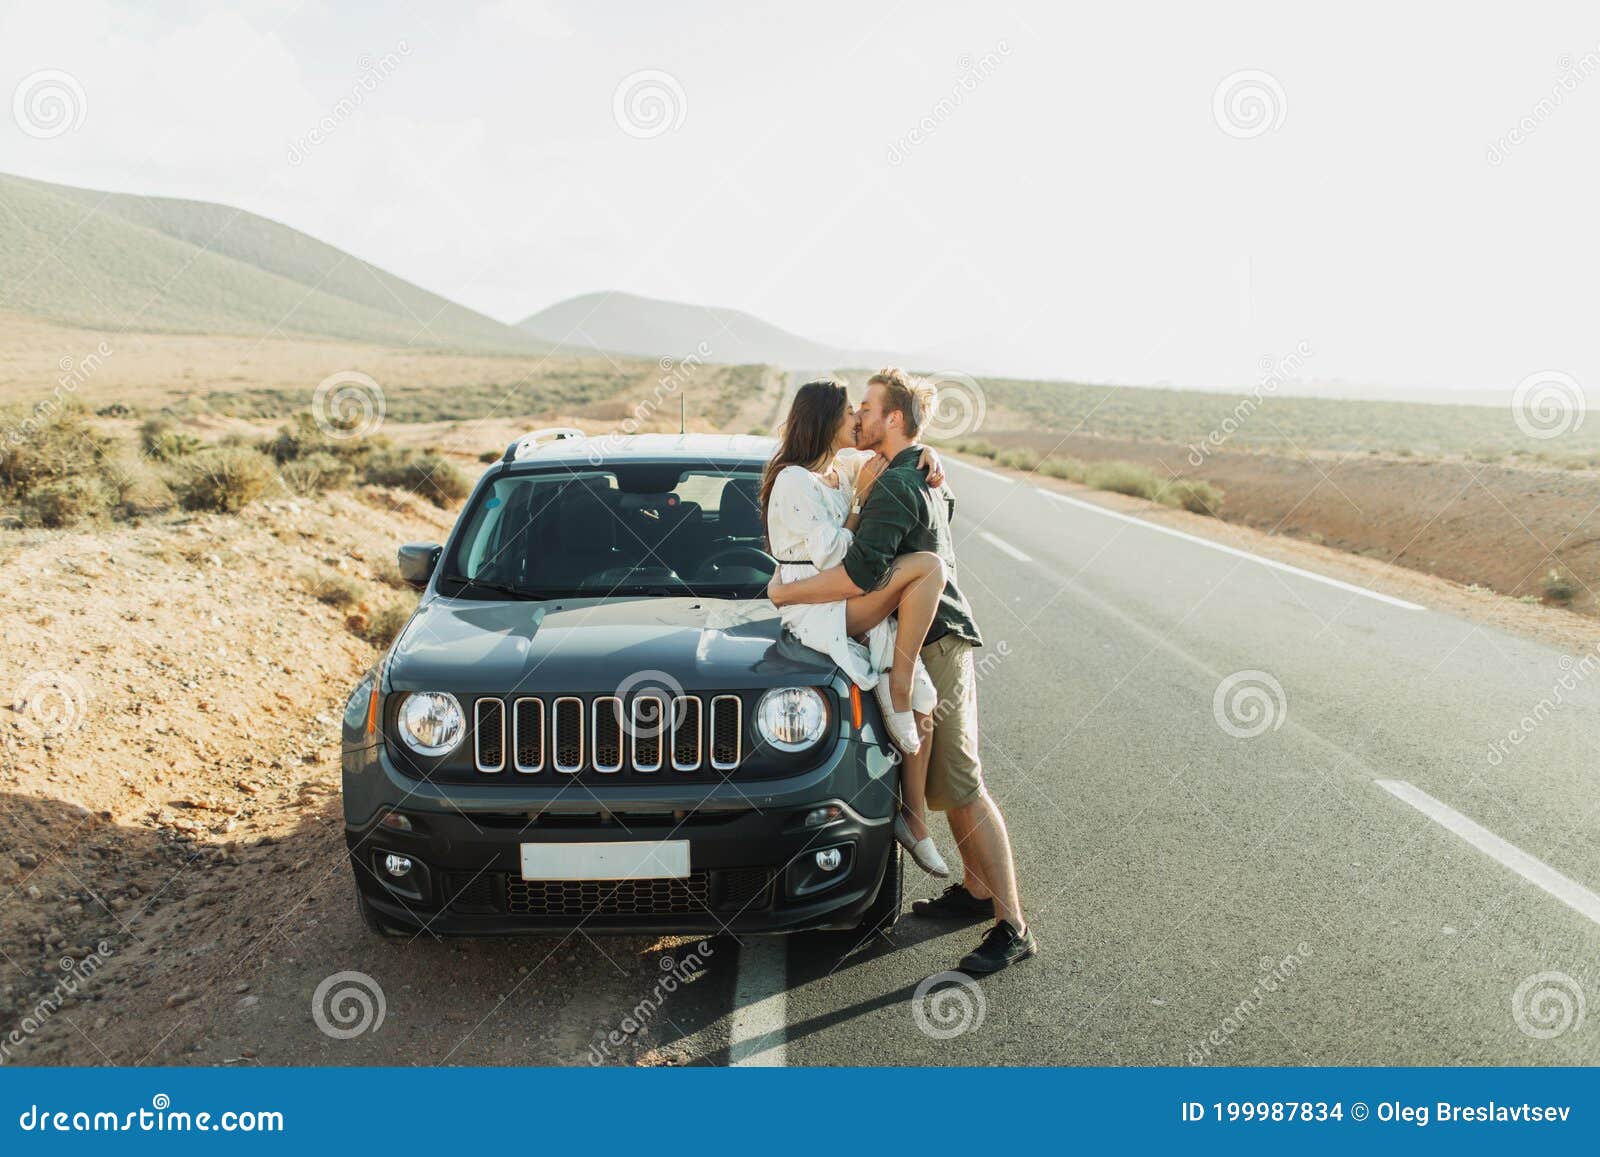 Road Trip Concept. Young Hipster Couple Kissing in Car on Highway